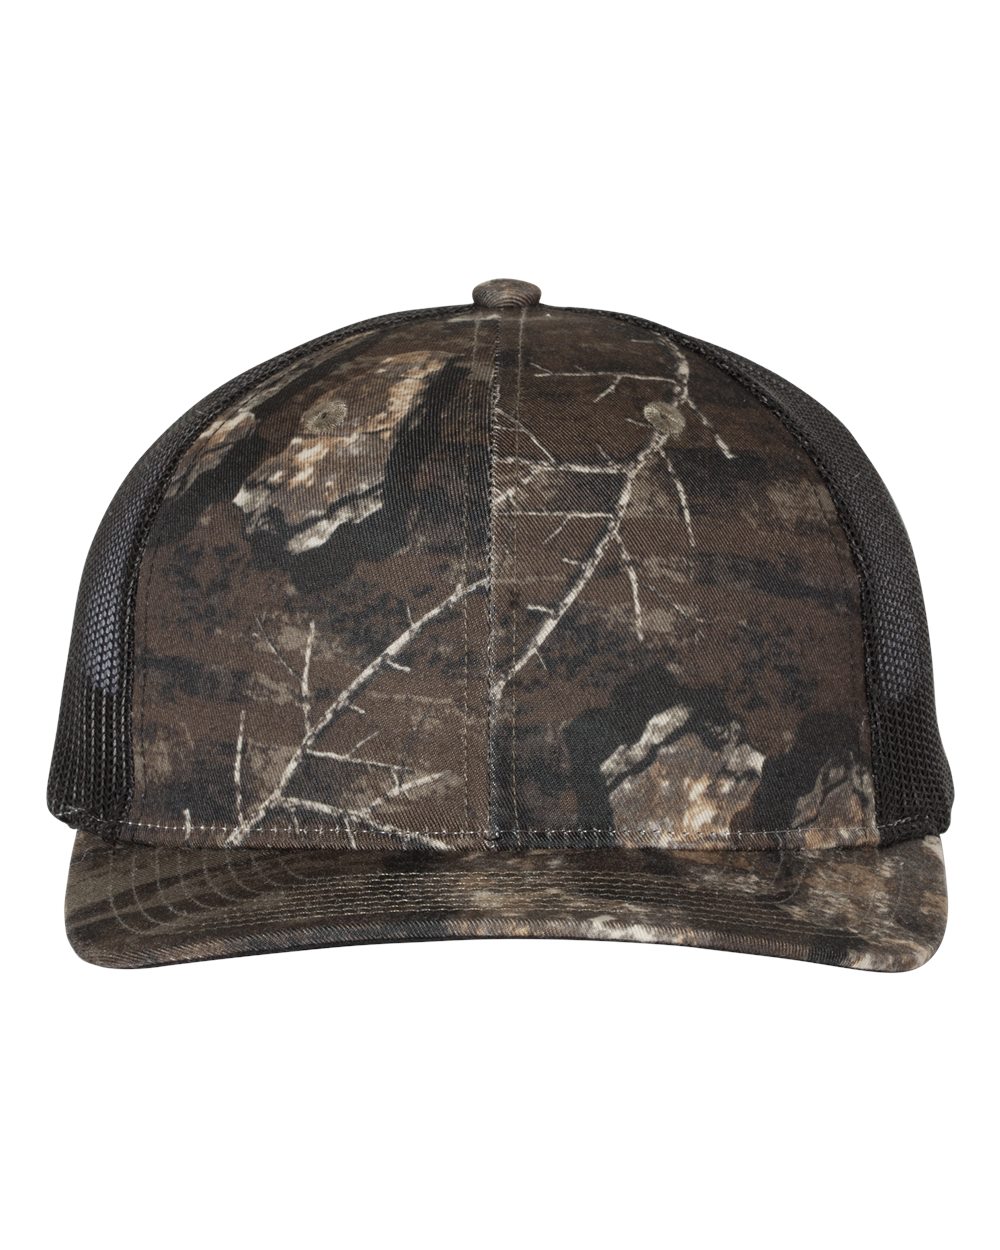 click to view Realtree Timber/ Black